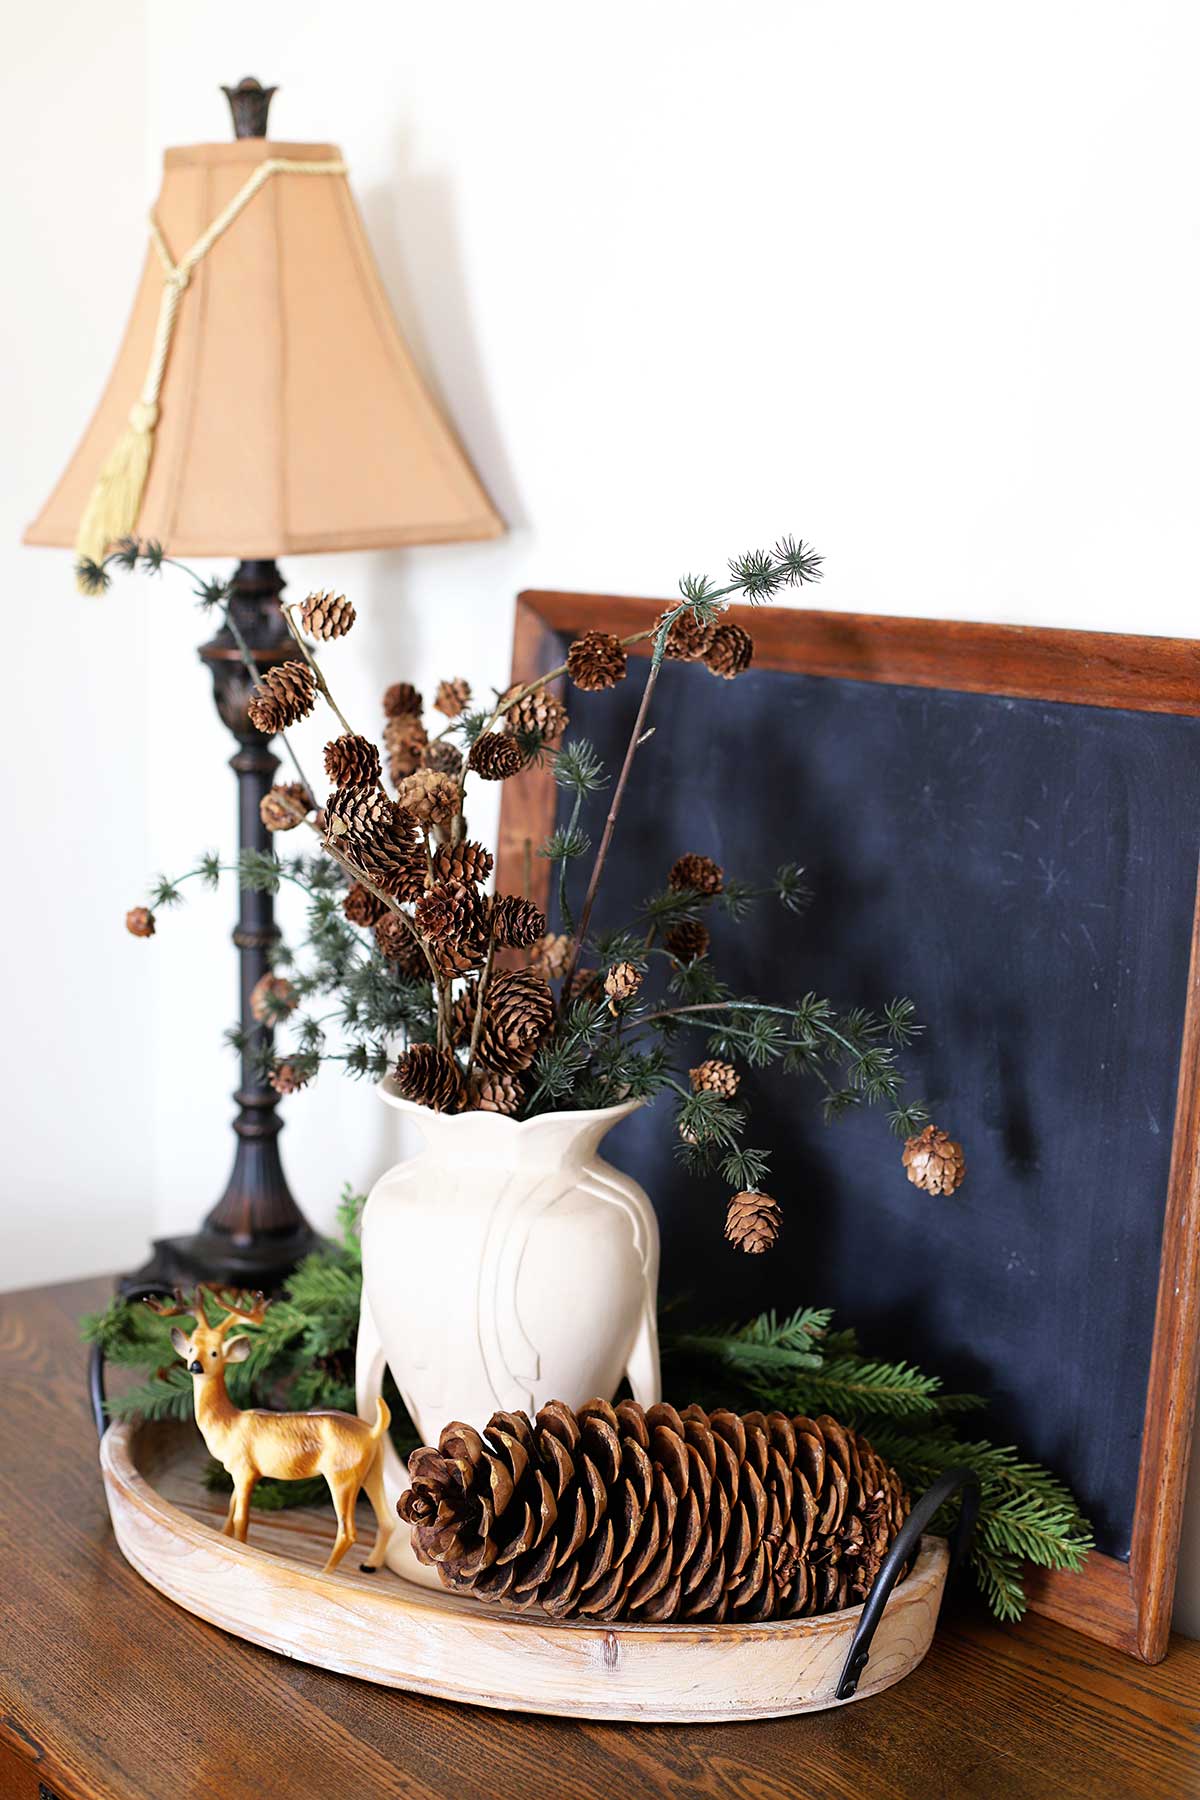 How to use pinecones in winter decor